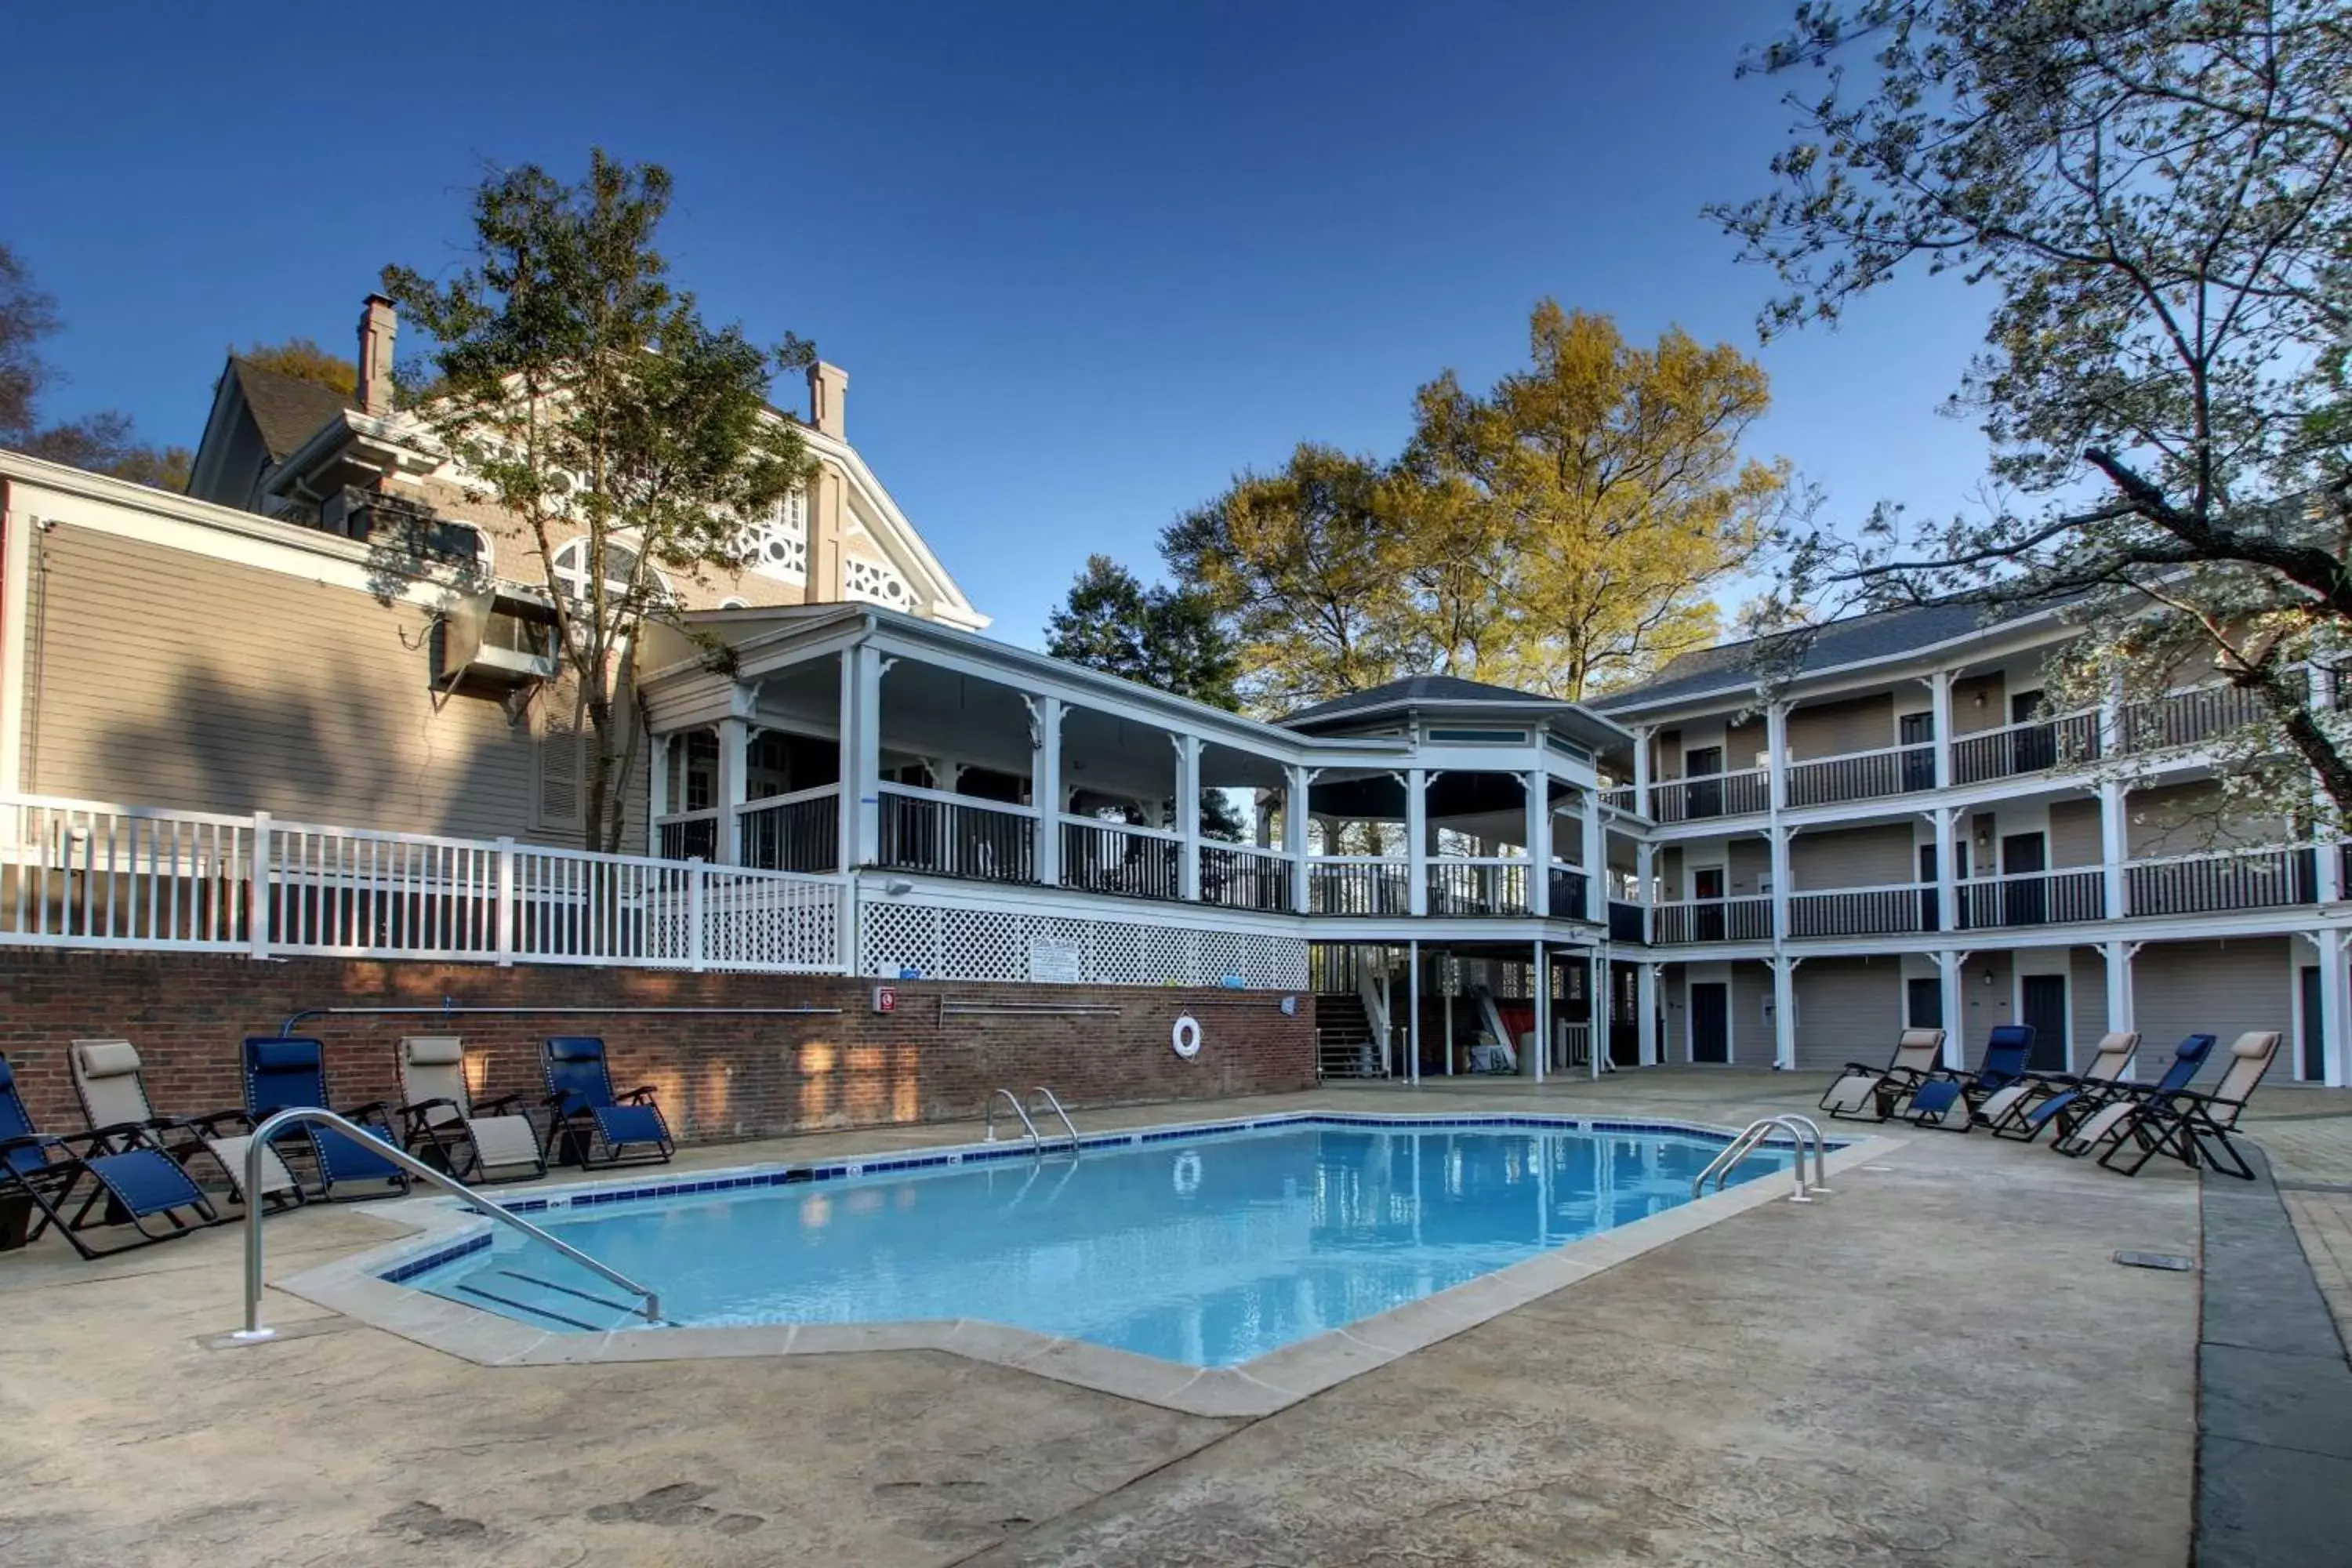 Pool view, Property Building in Hotel Finial BW Premier Collection Oxford - Anniston